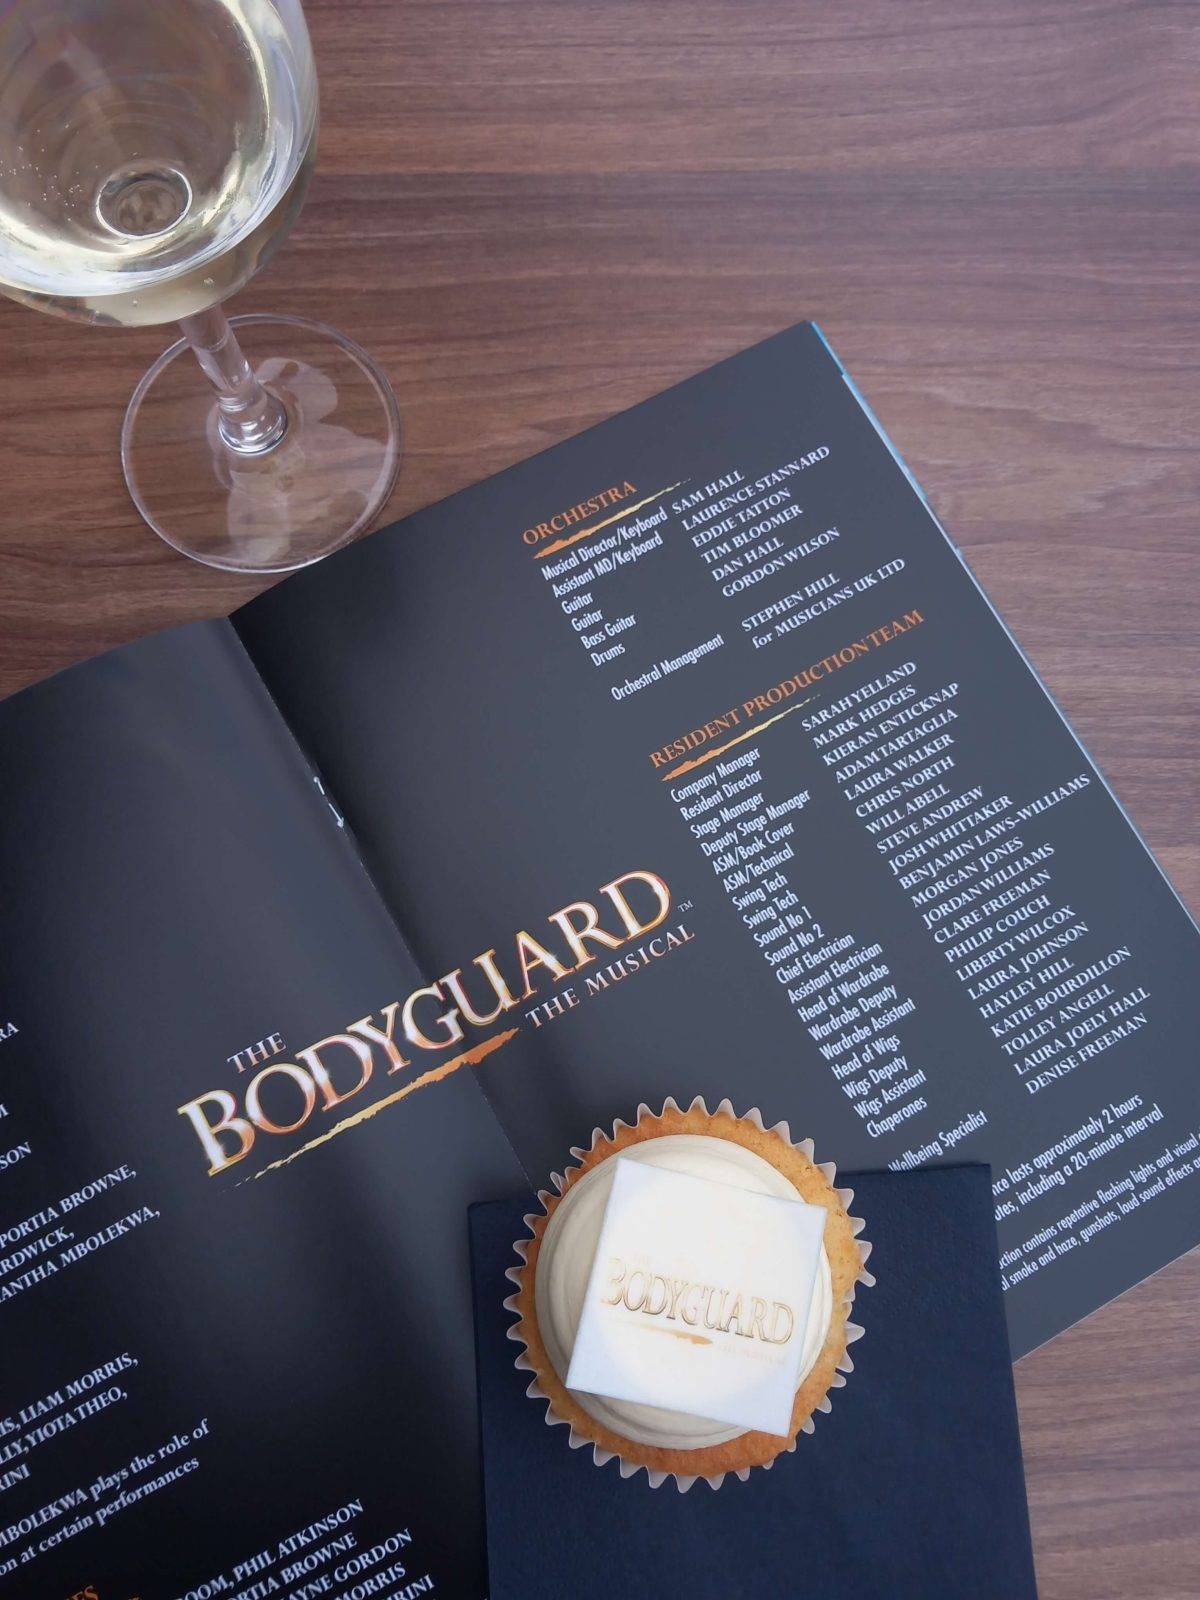 The Bodyguard – The Musical programme 